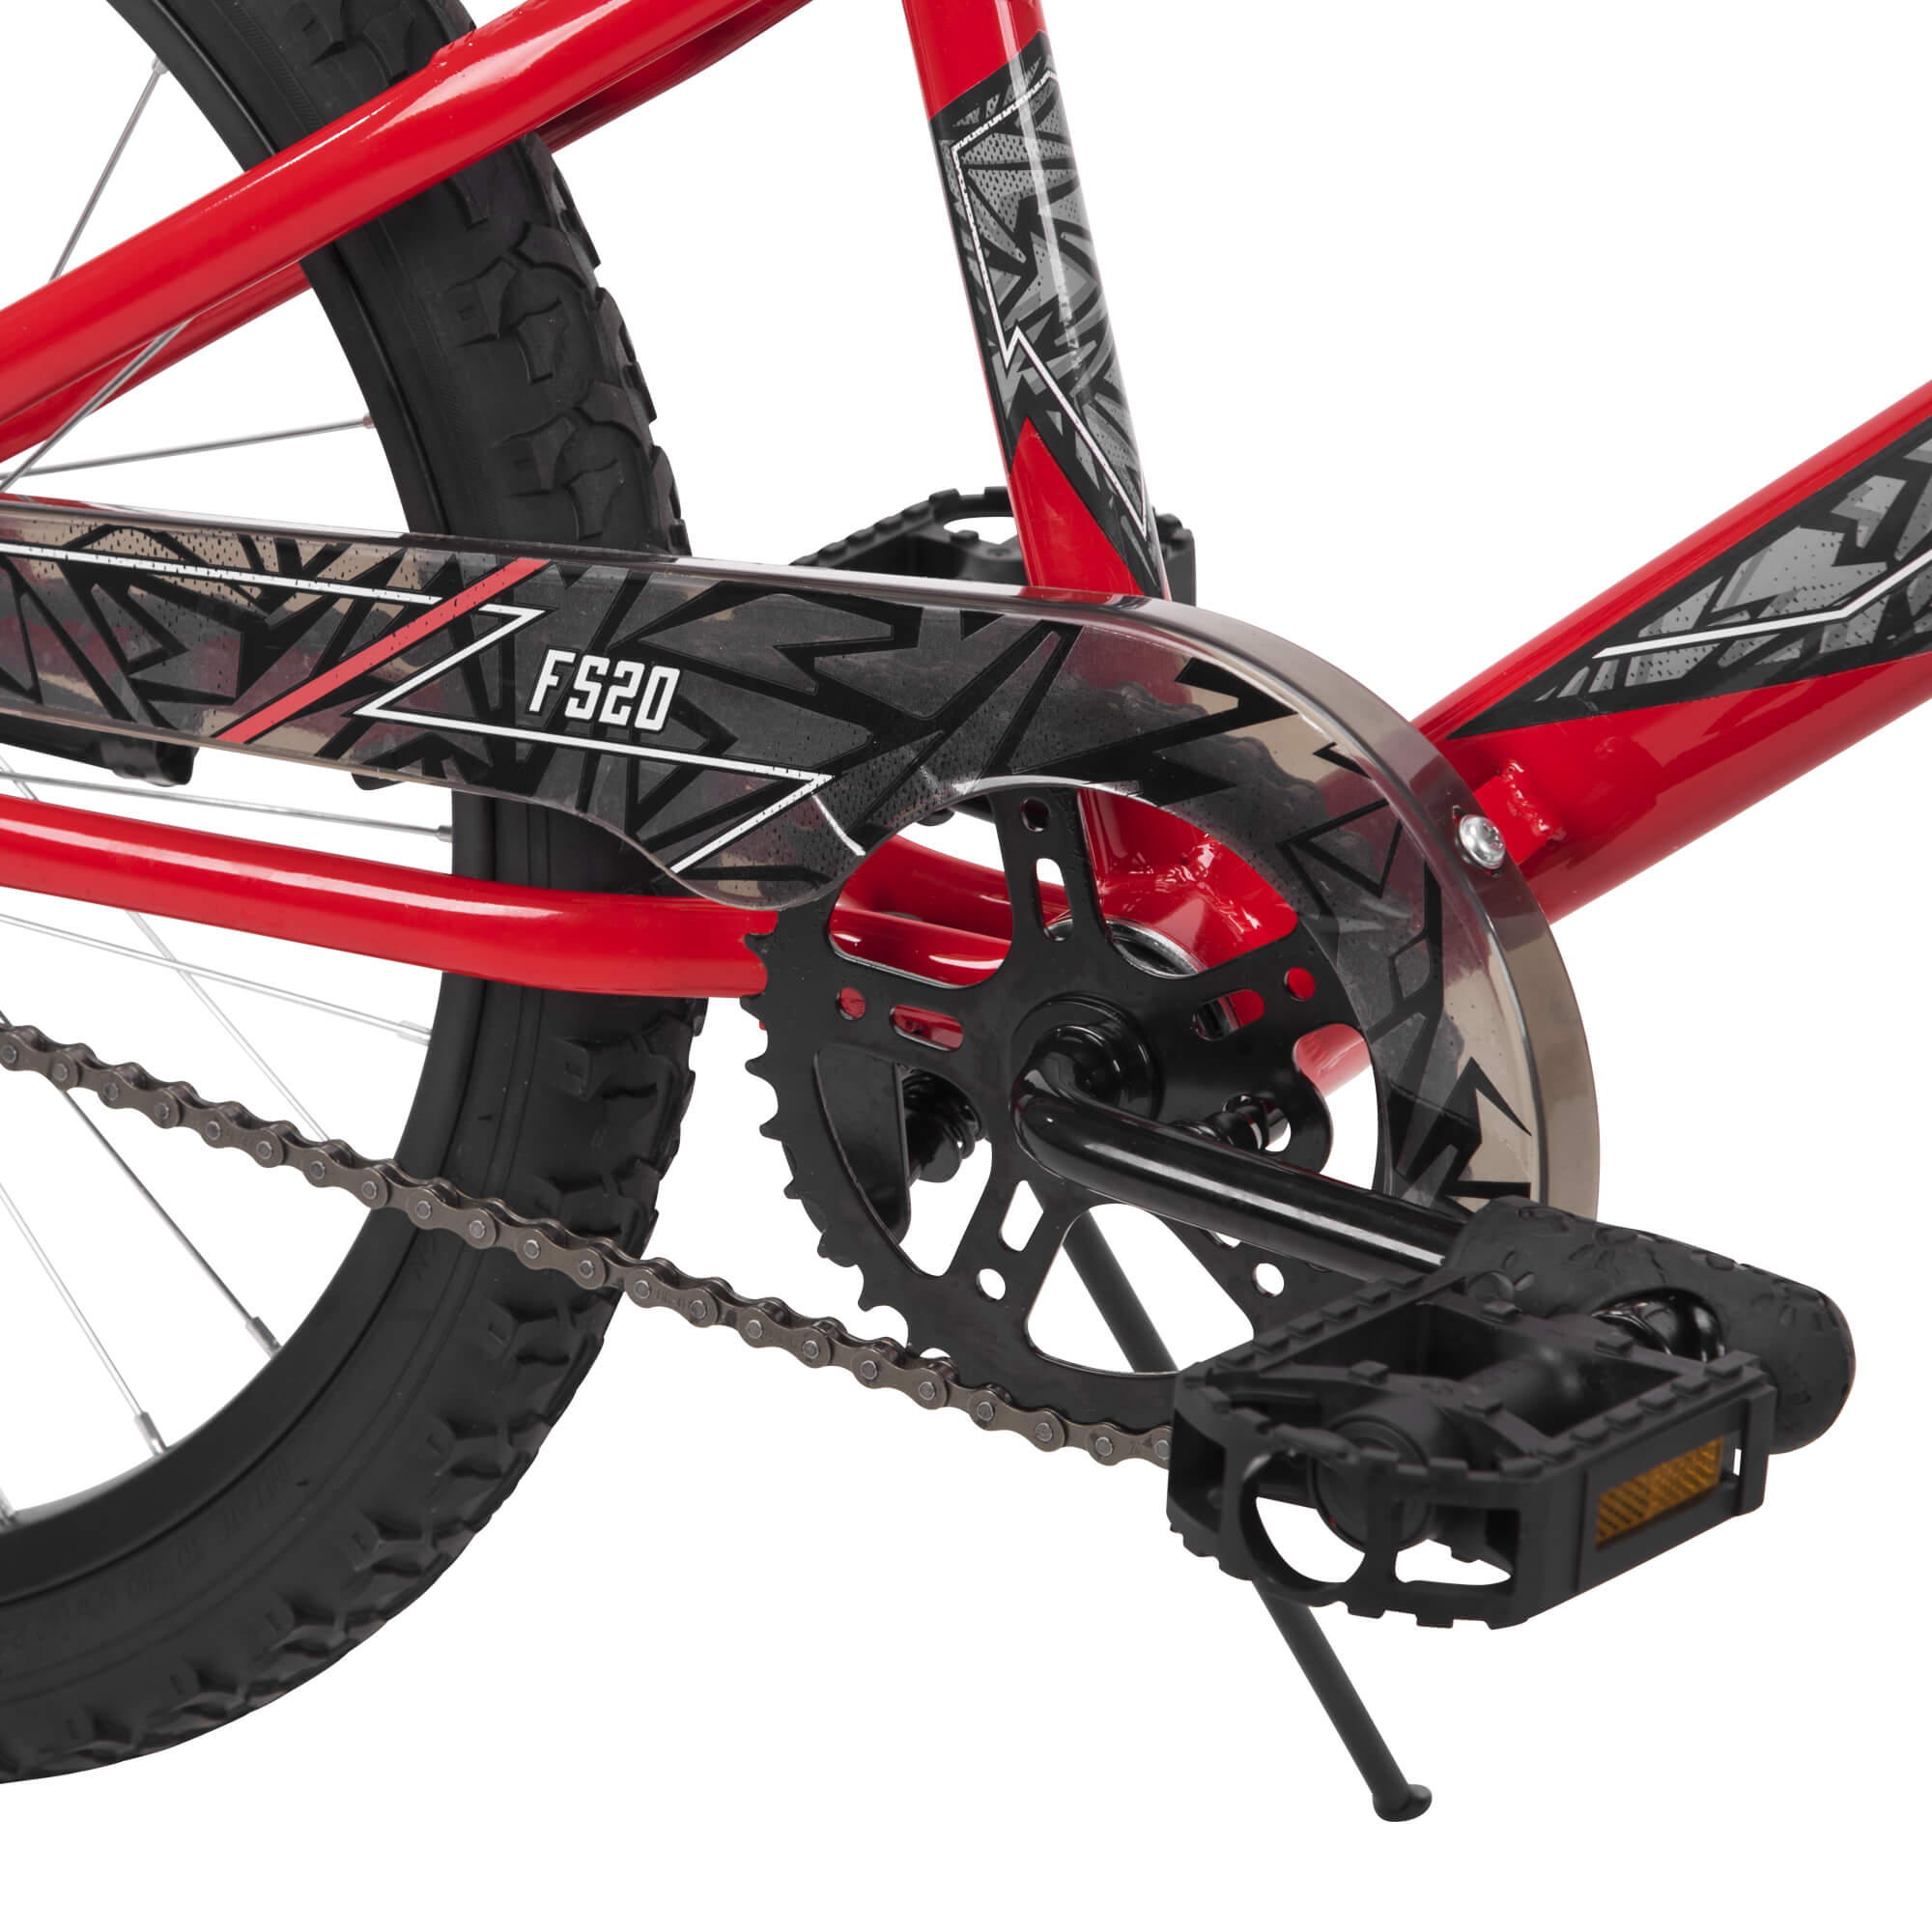 Huffy 20" Rock It EZ Build Kids Bike for Boys, Red - image 3 of 6